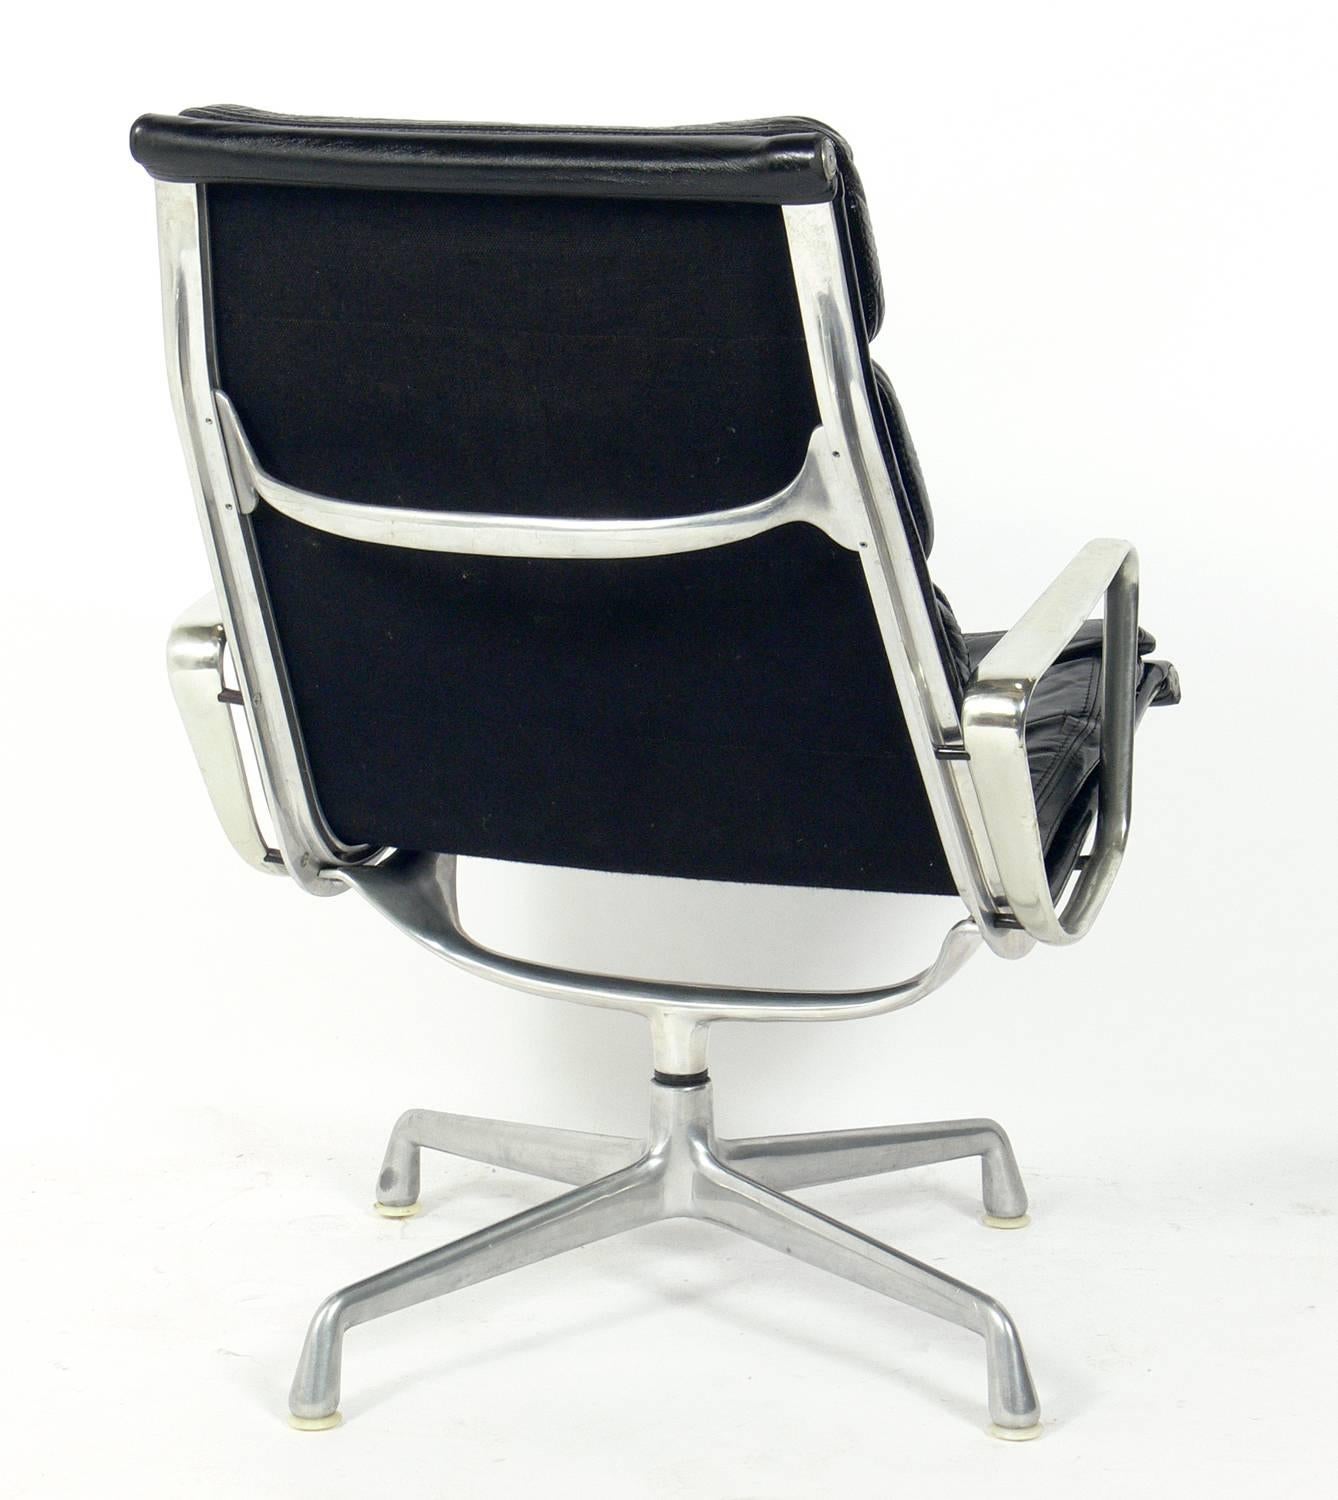 American Soft Pad Leather Chair Designed by Charles and Ray Eames for Herman Miller